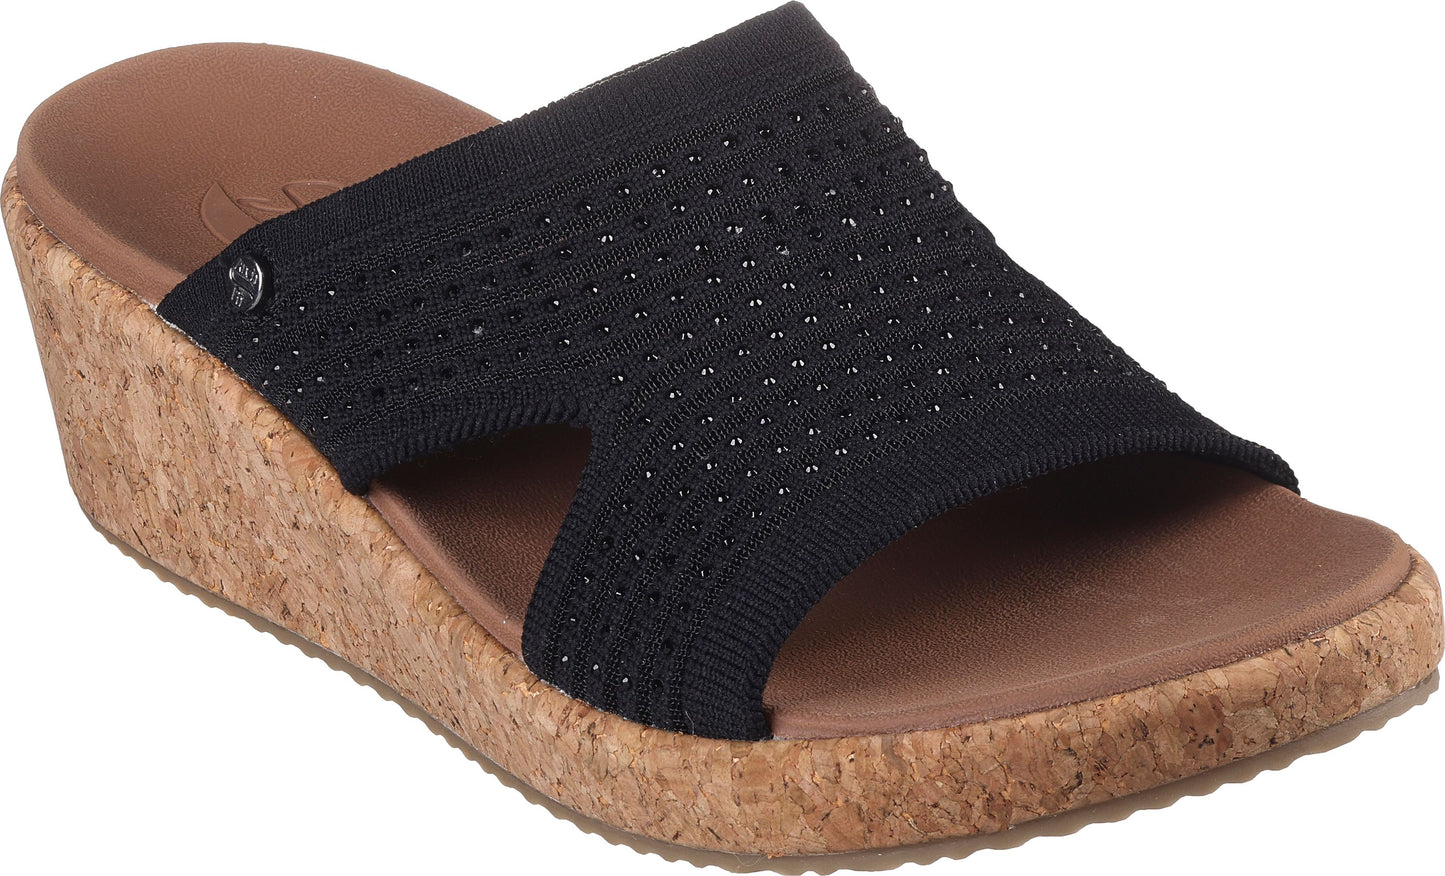 Skechers Sandals Arch Fit Beverlee Sweet Lacey Black